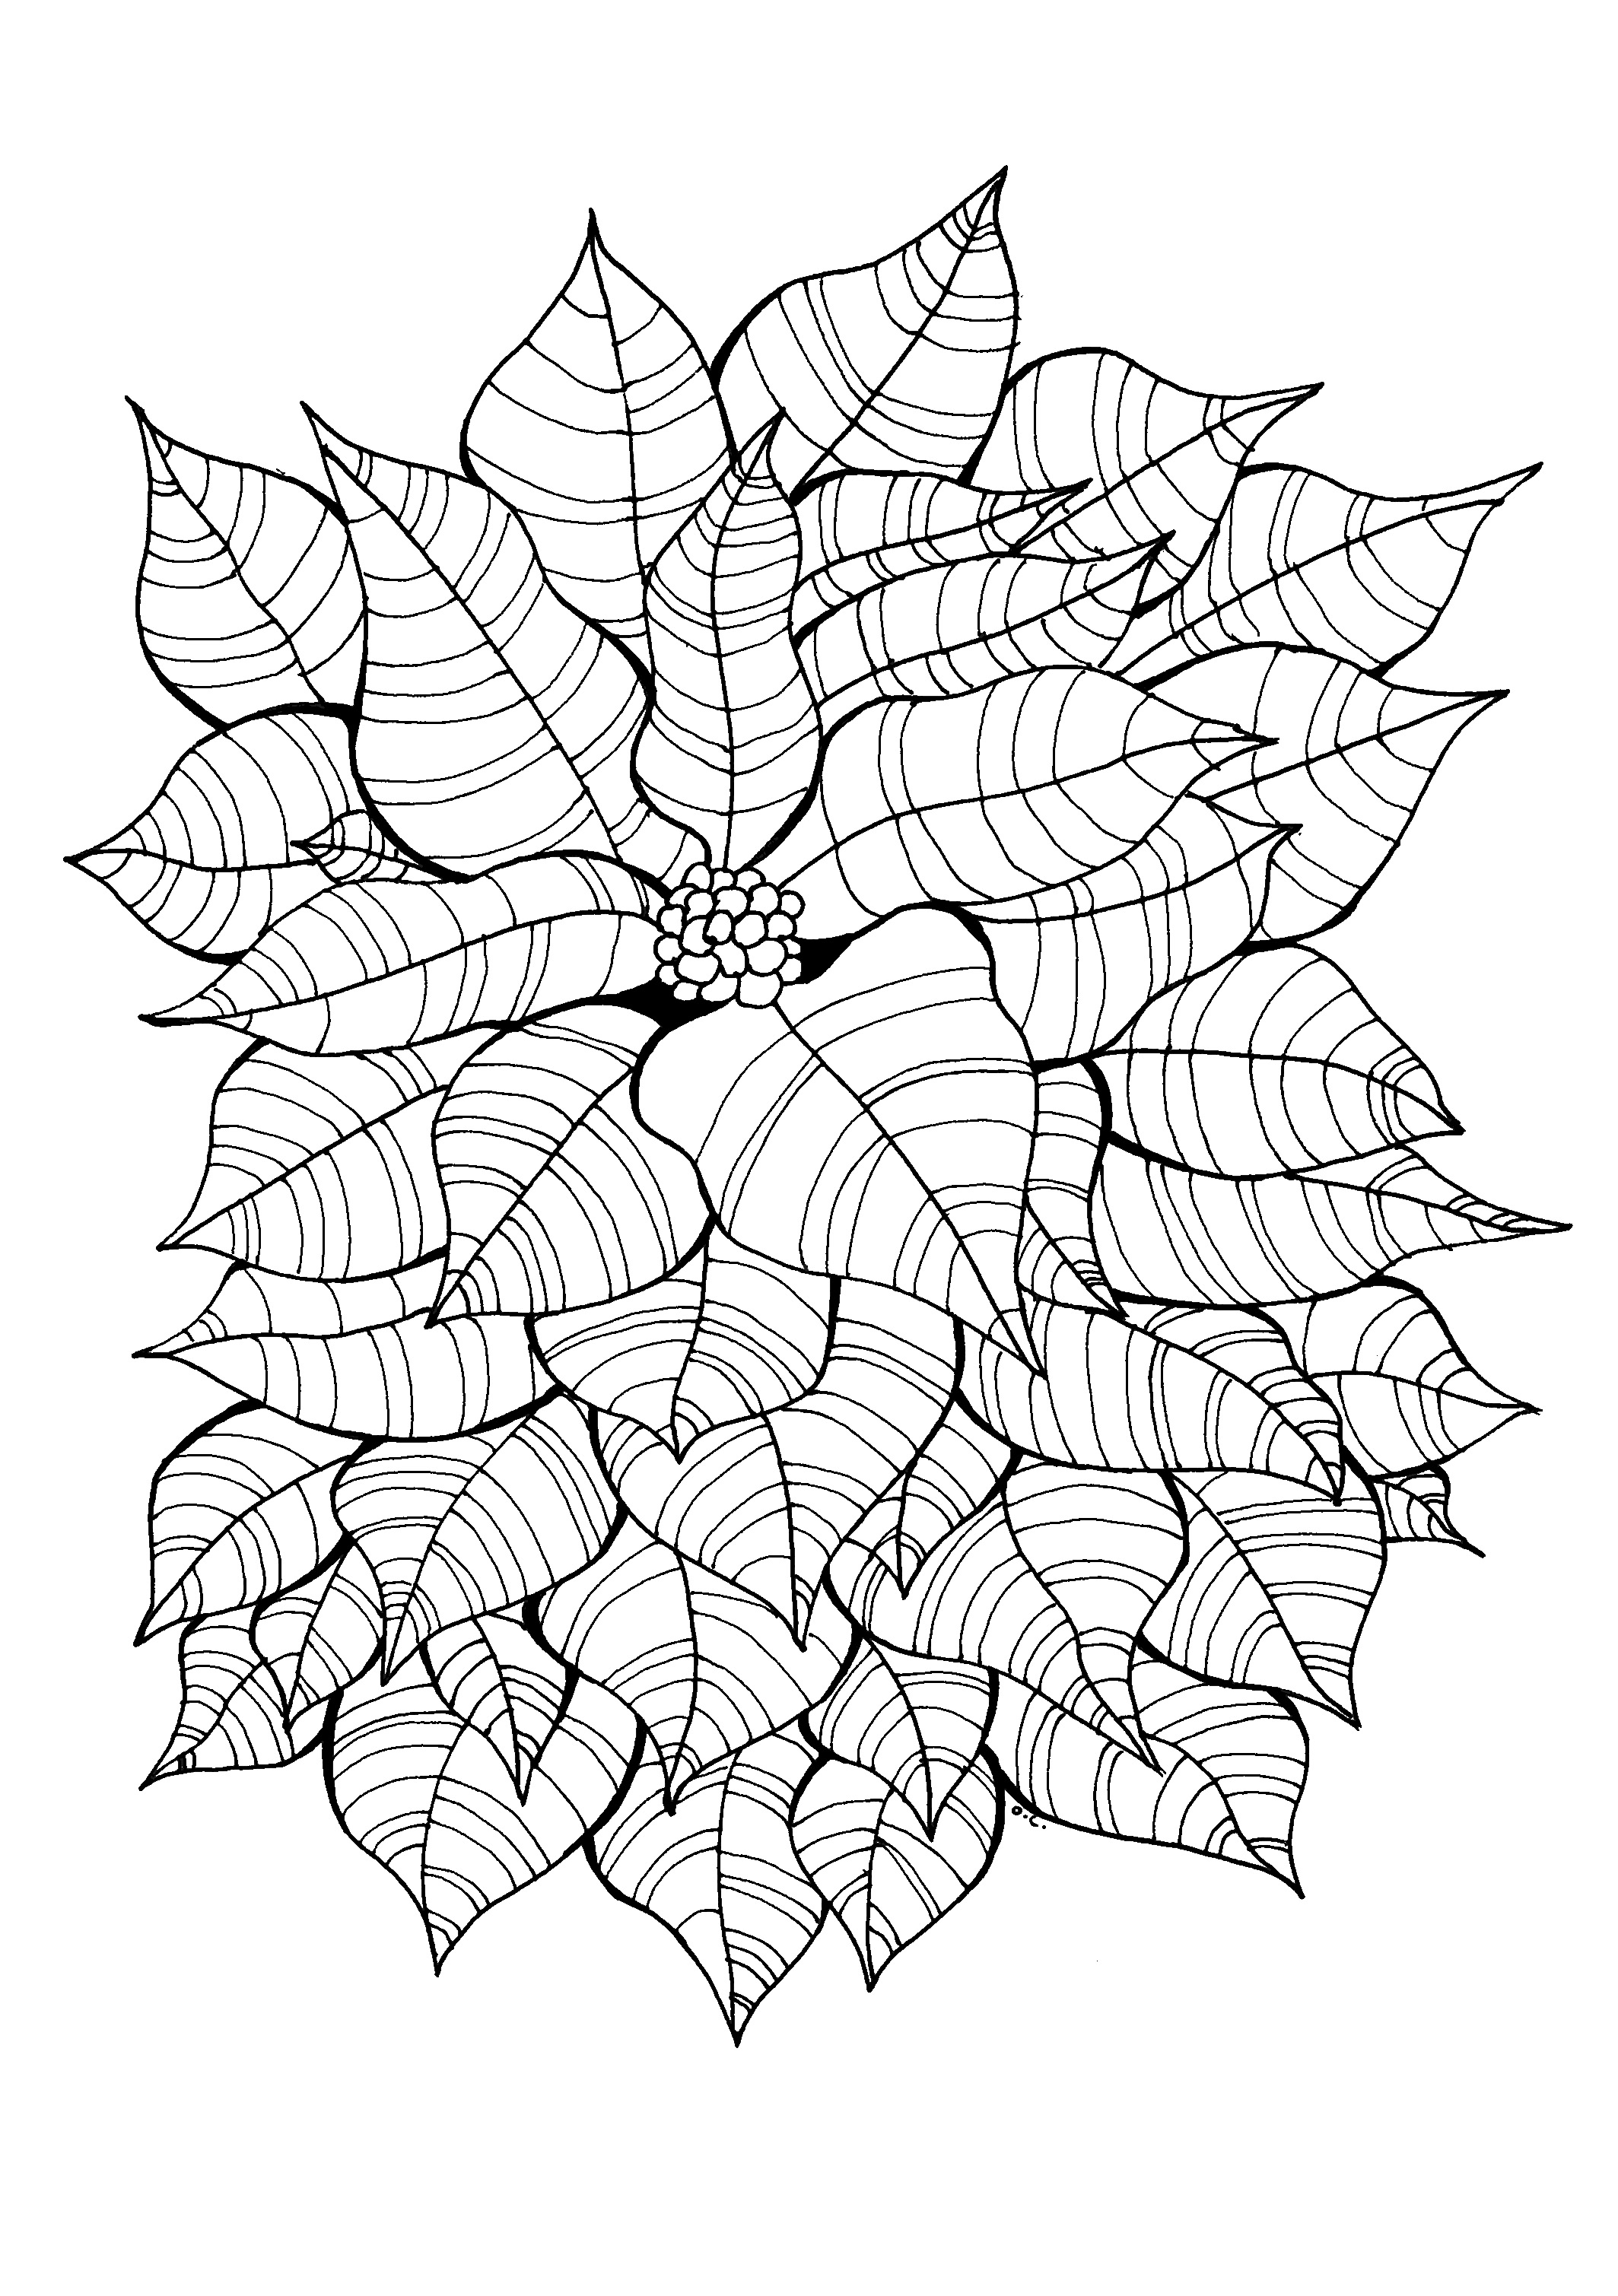 Simple flowers - Flowers Adult Coloring Pages